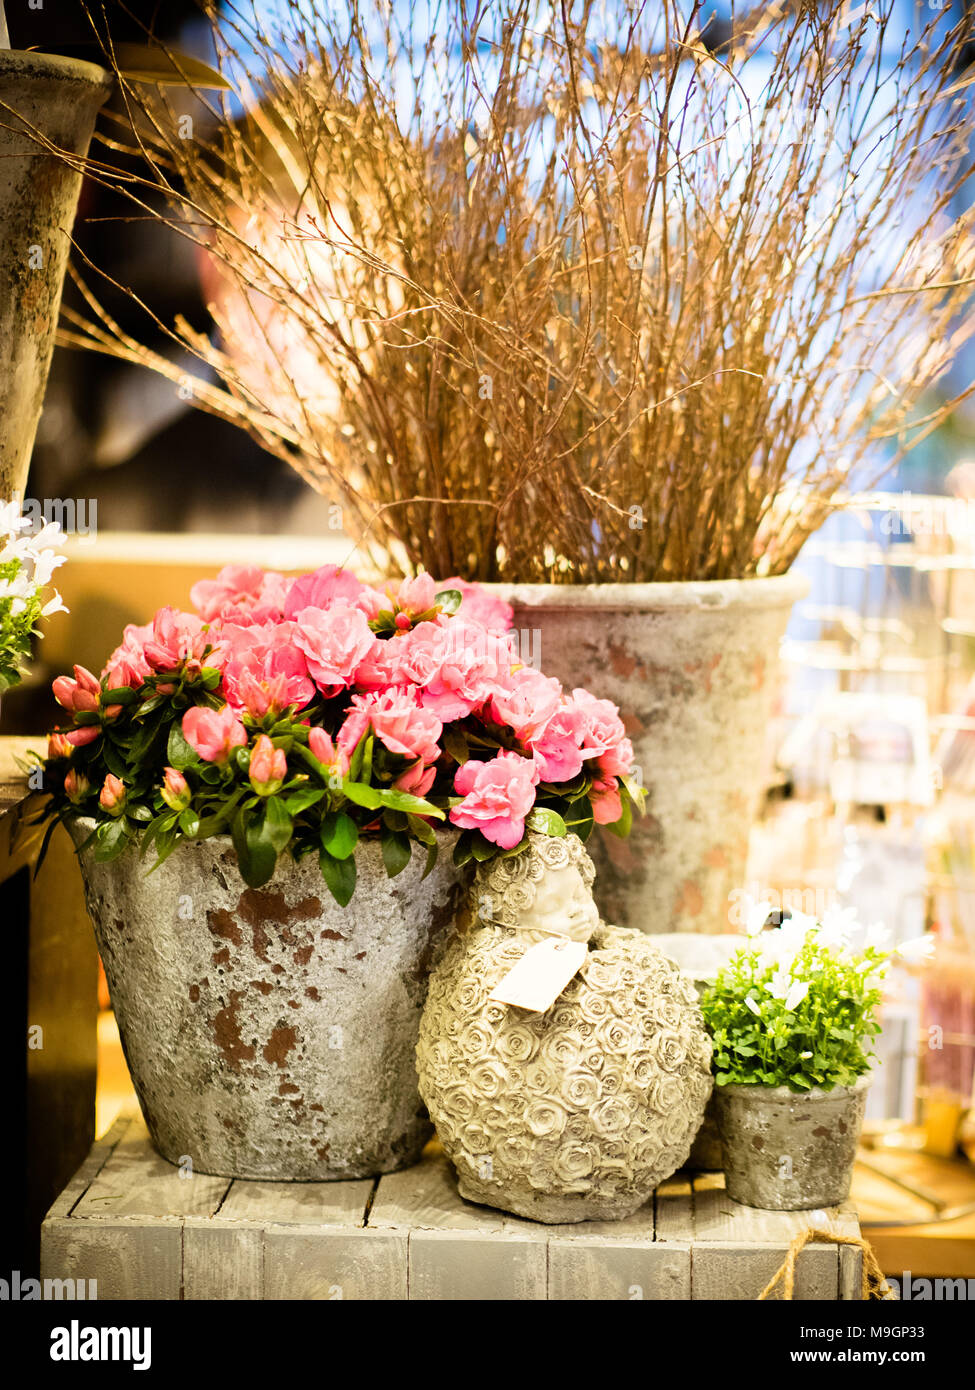 The small pink potted rose on a beautiful table, in the flower shop Stock Photo